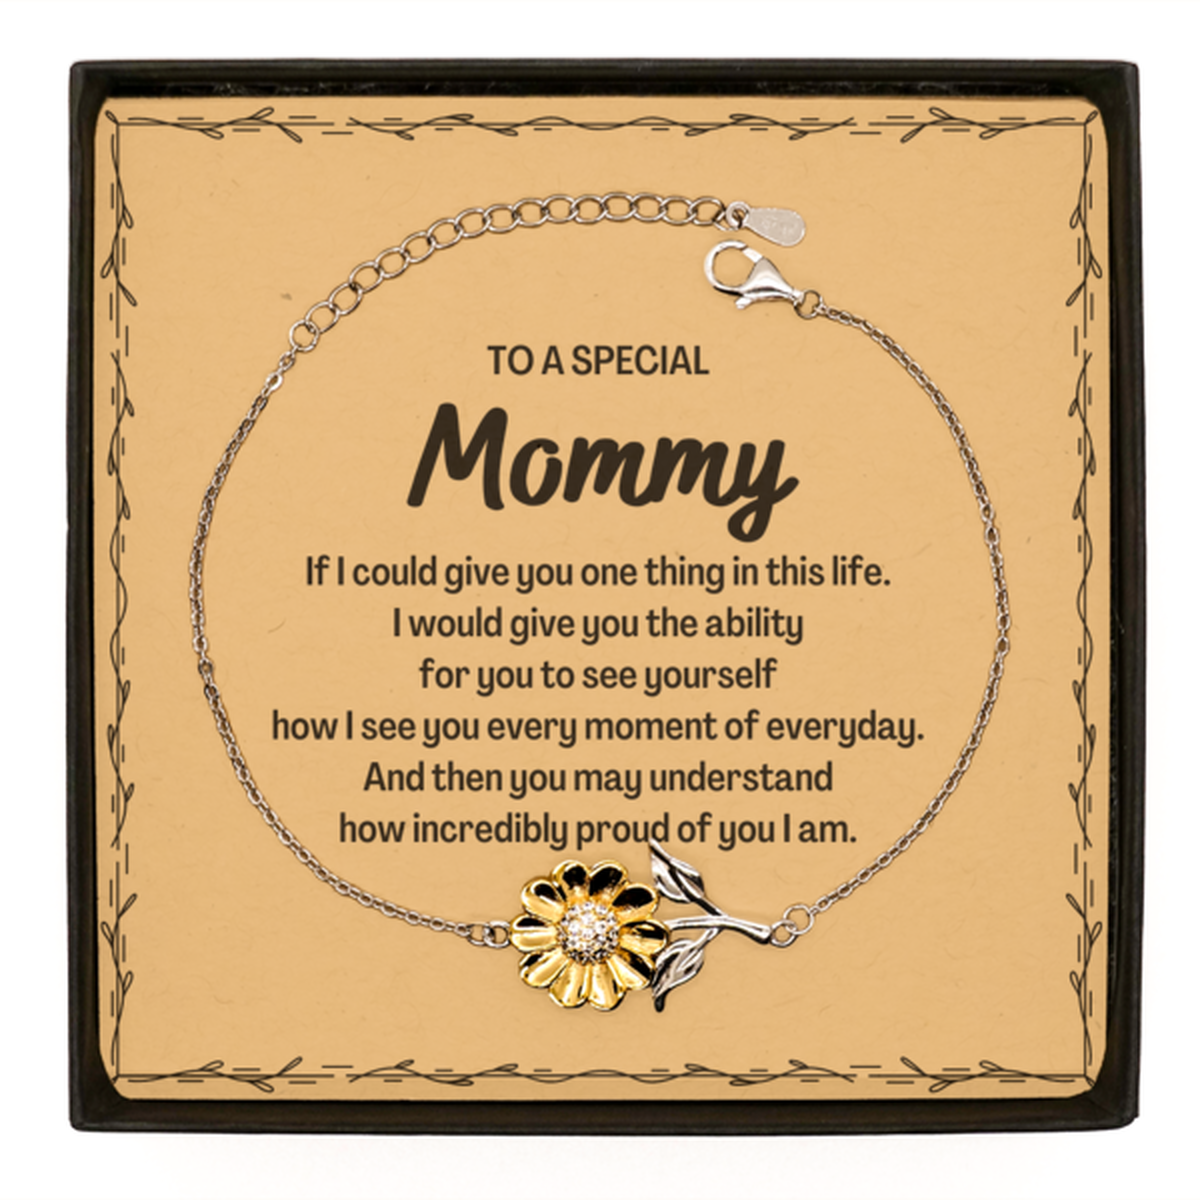 To My Mommy Sunflower Bracelet, Gifts For Mommy Message Card, Inspirational Gifts for Christmas Birthday, Epic Gifts for Mommy To A Special Mommy how incredibly proud of you I am